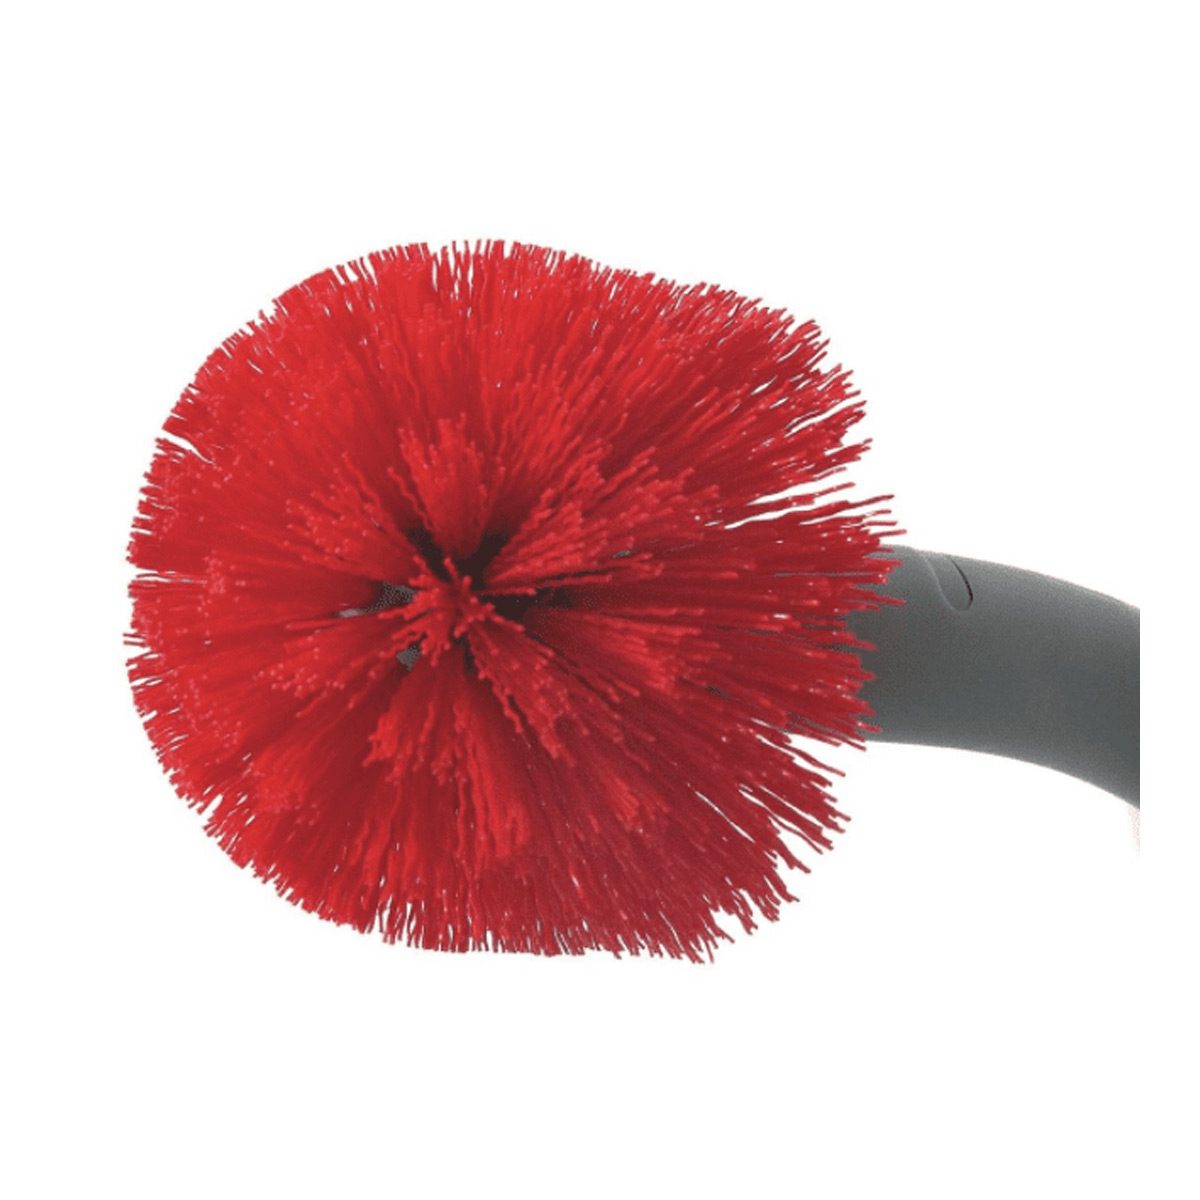 cleaning-equipment-brushware-unger-brush-head-2-pack-bathroom-toilet-cleaning-system-red-vjs-distributors-UNGBBRHR